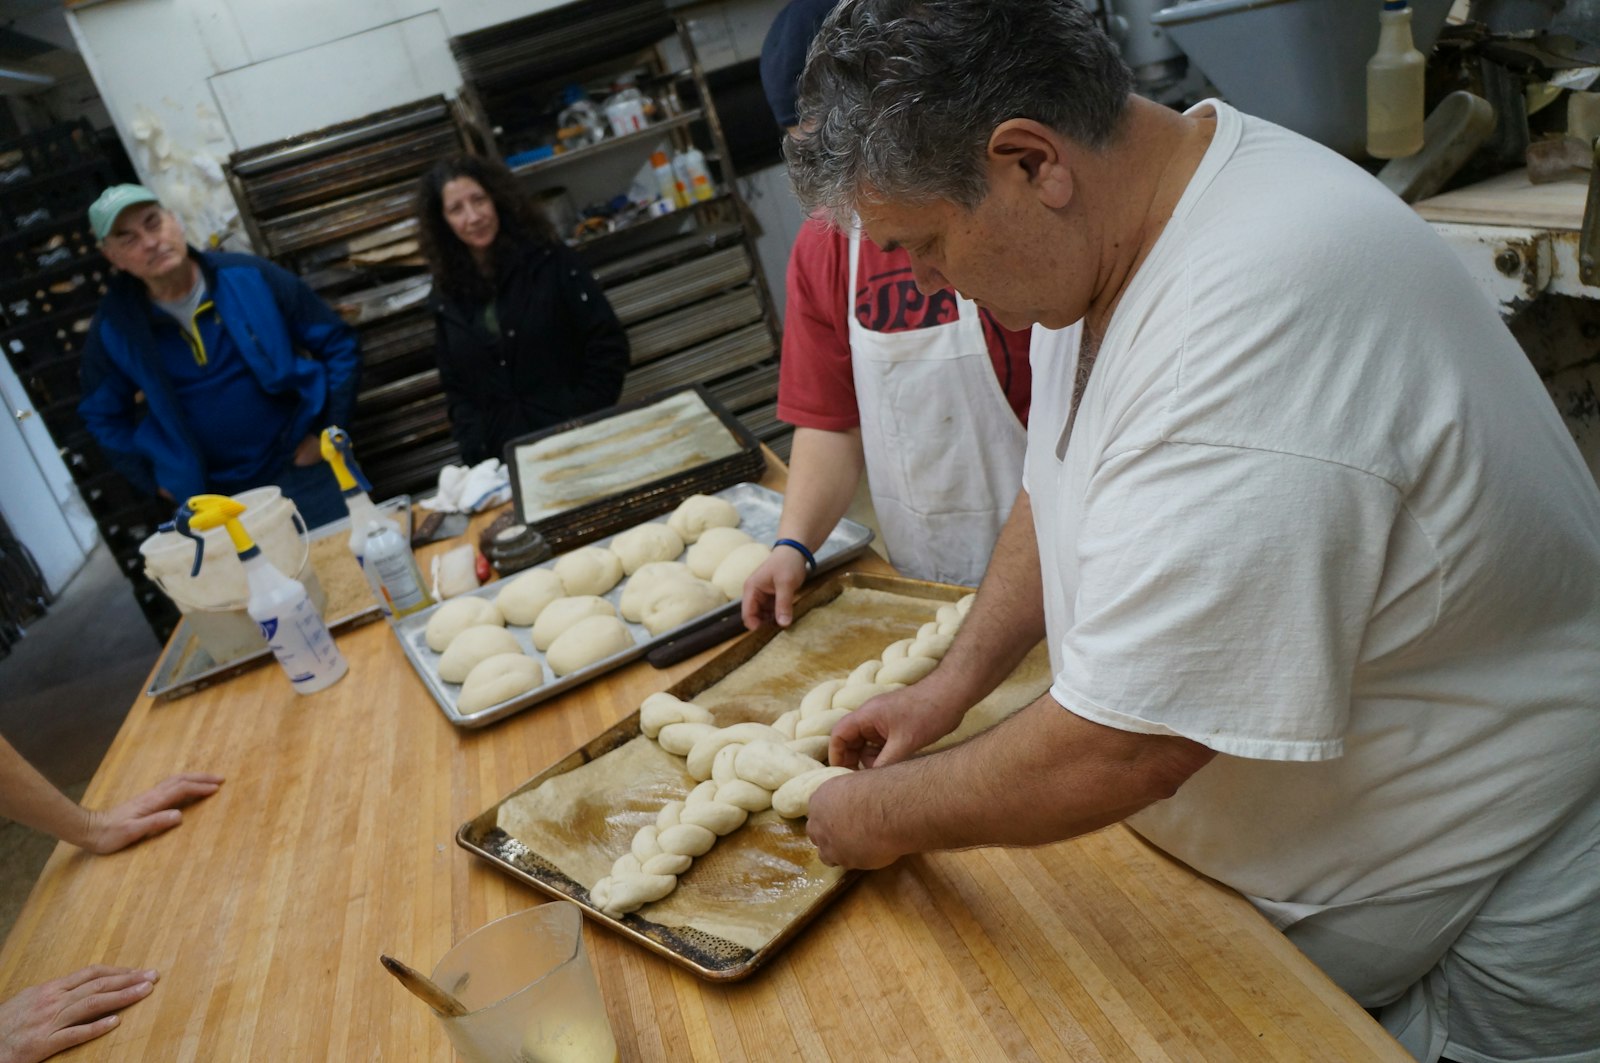 Sam Zerilli, owner of Zerilli Bakery in Clinton Township, folds dough into the shape of a cross March 19 in preparation for St. Joseph's feast day.